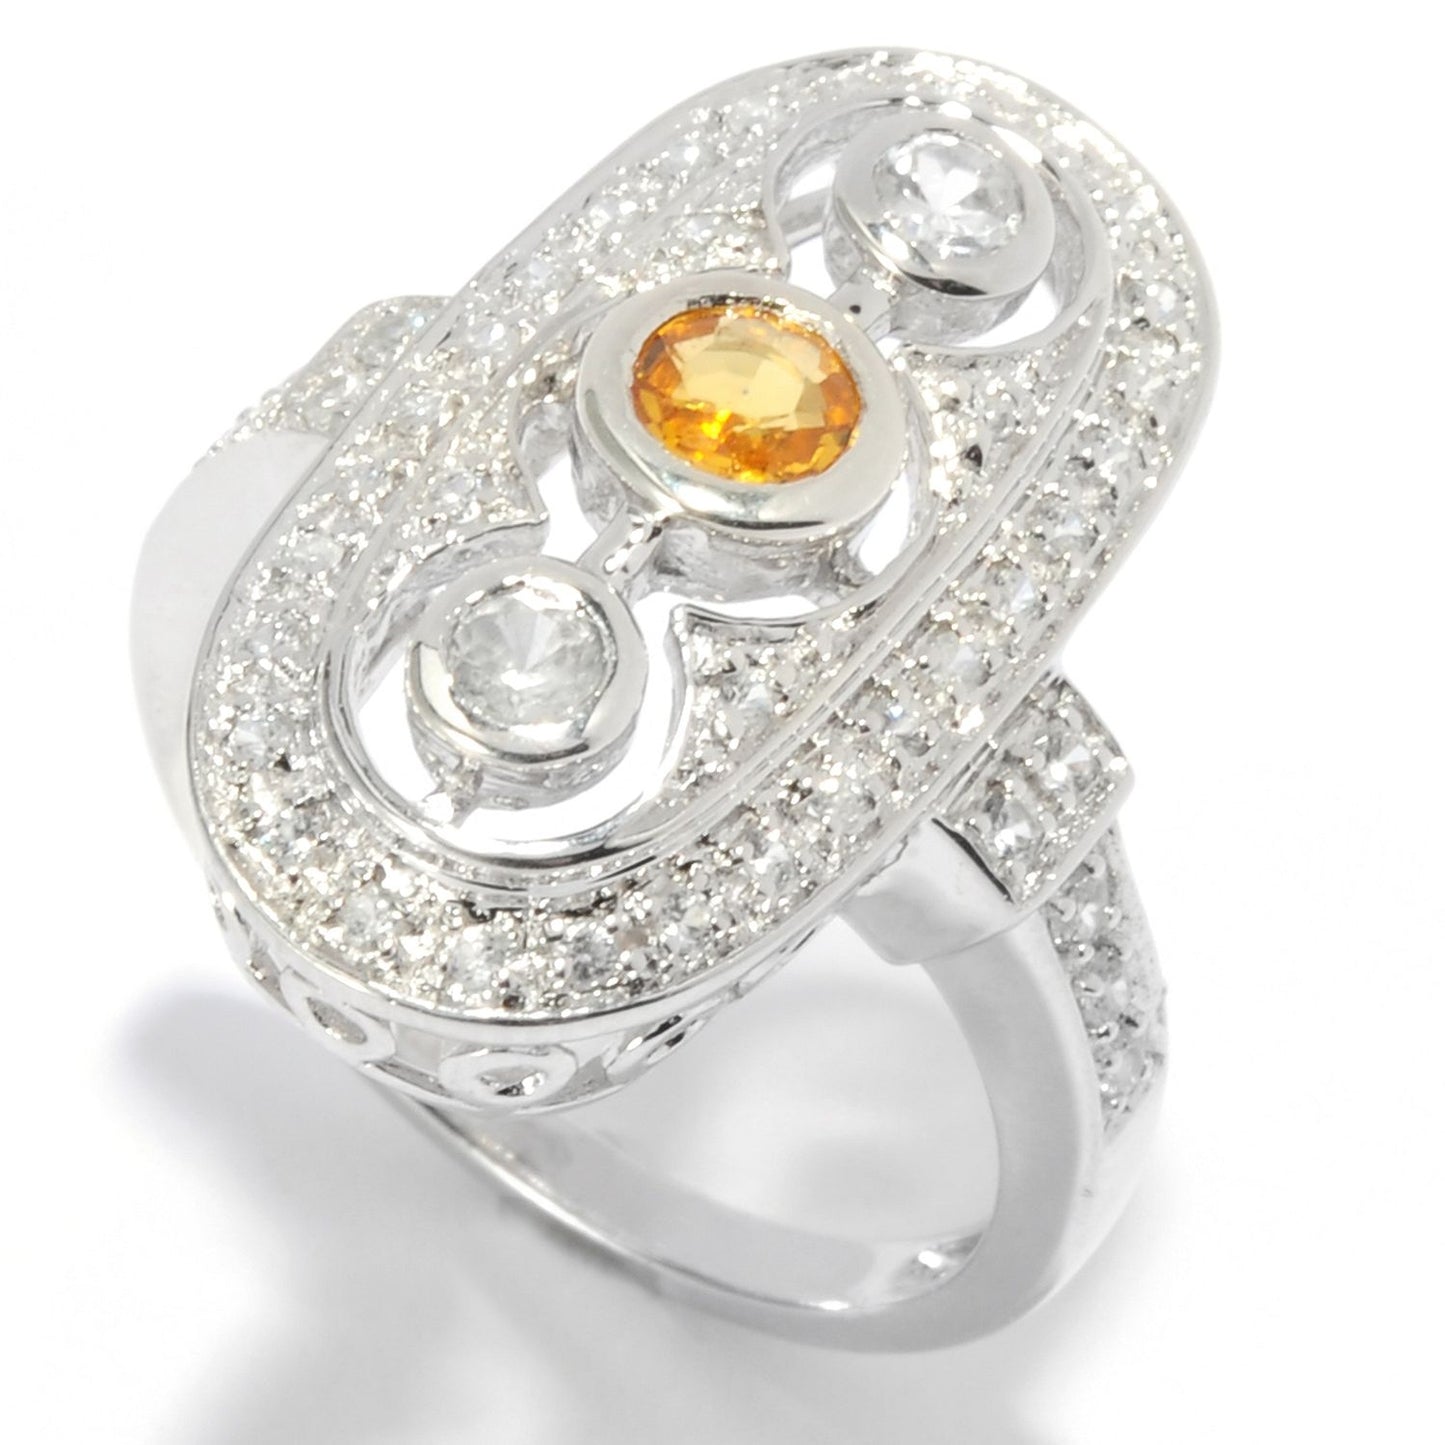 Sterling Silver 1.32Ctw Yellow Sapphire & White Cz Ring - Pinctore